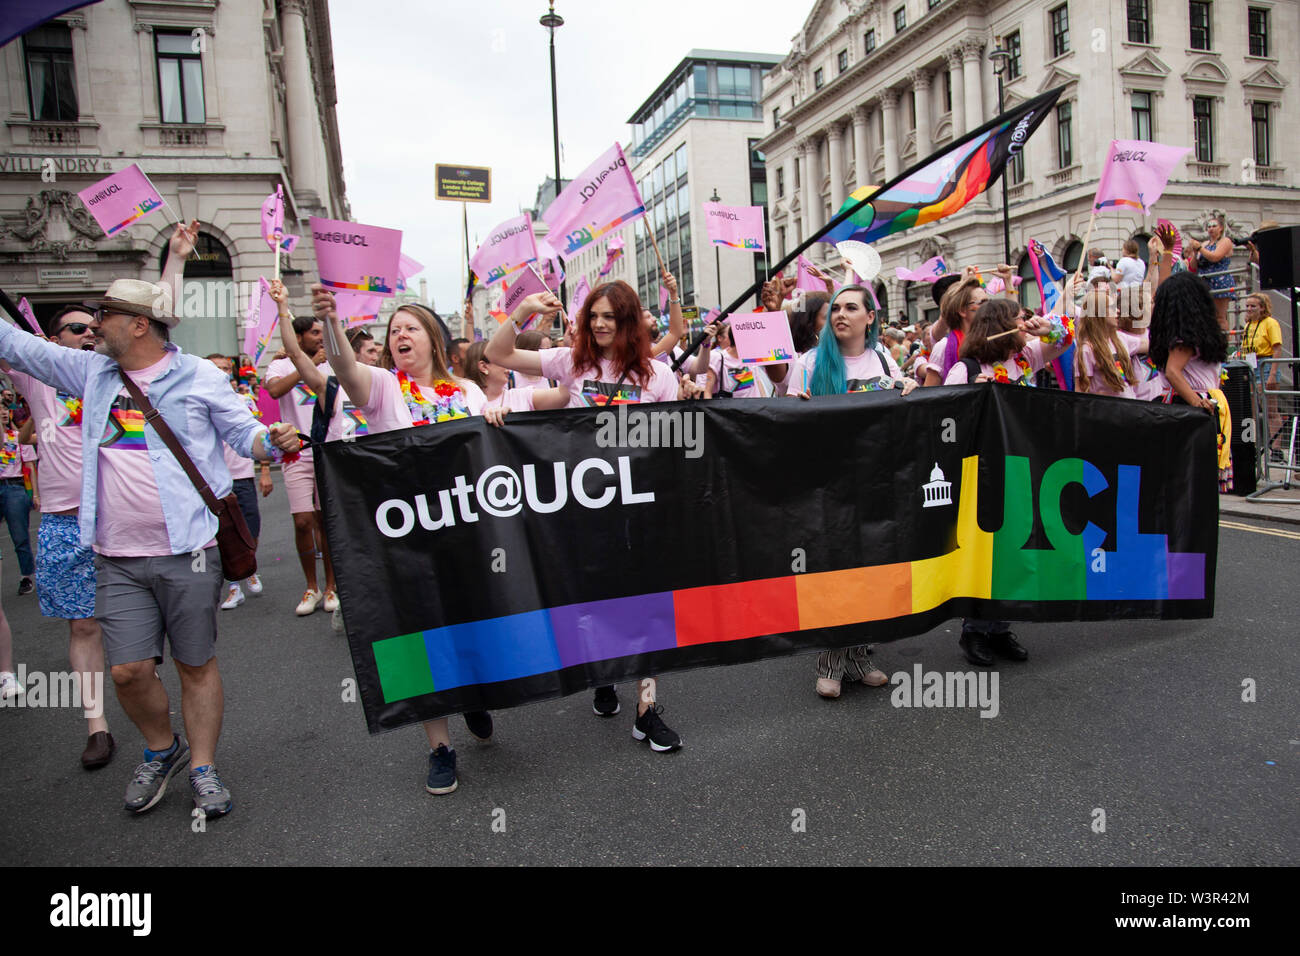 LONDON, UK - July 6th 2019: Staff from University College London take part in the annual gay pride march in central London Stock Photo